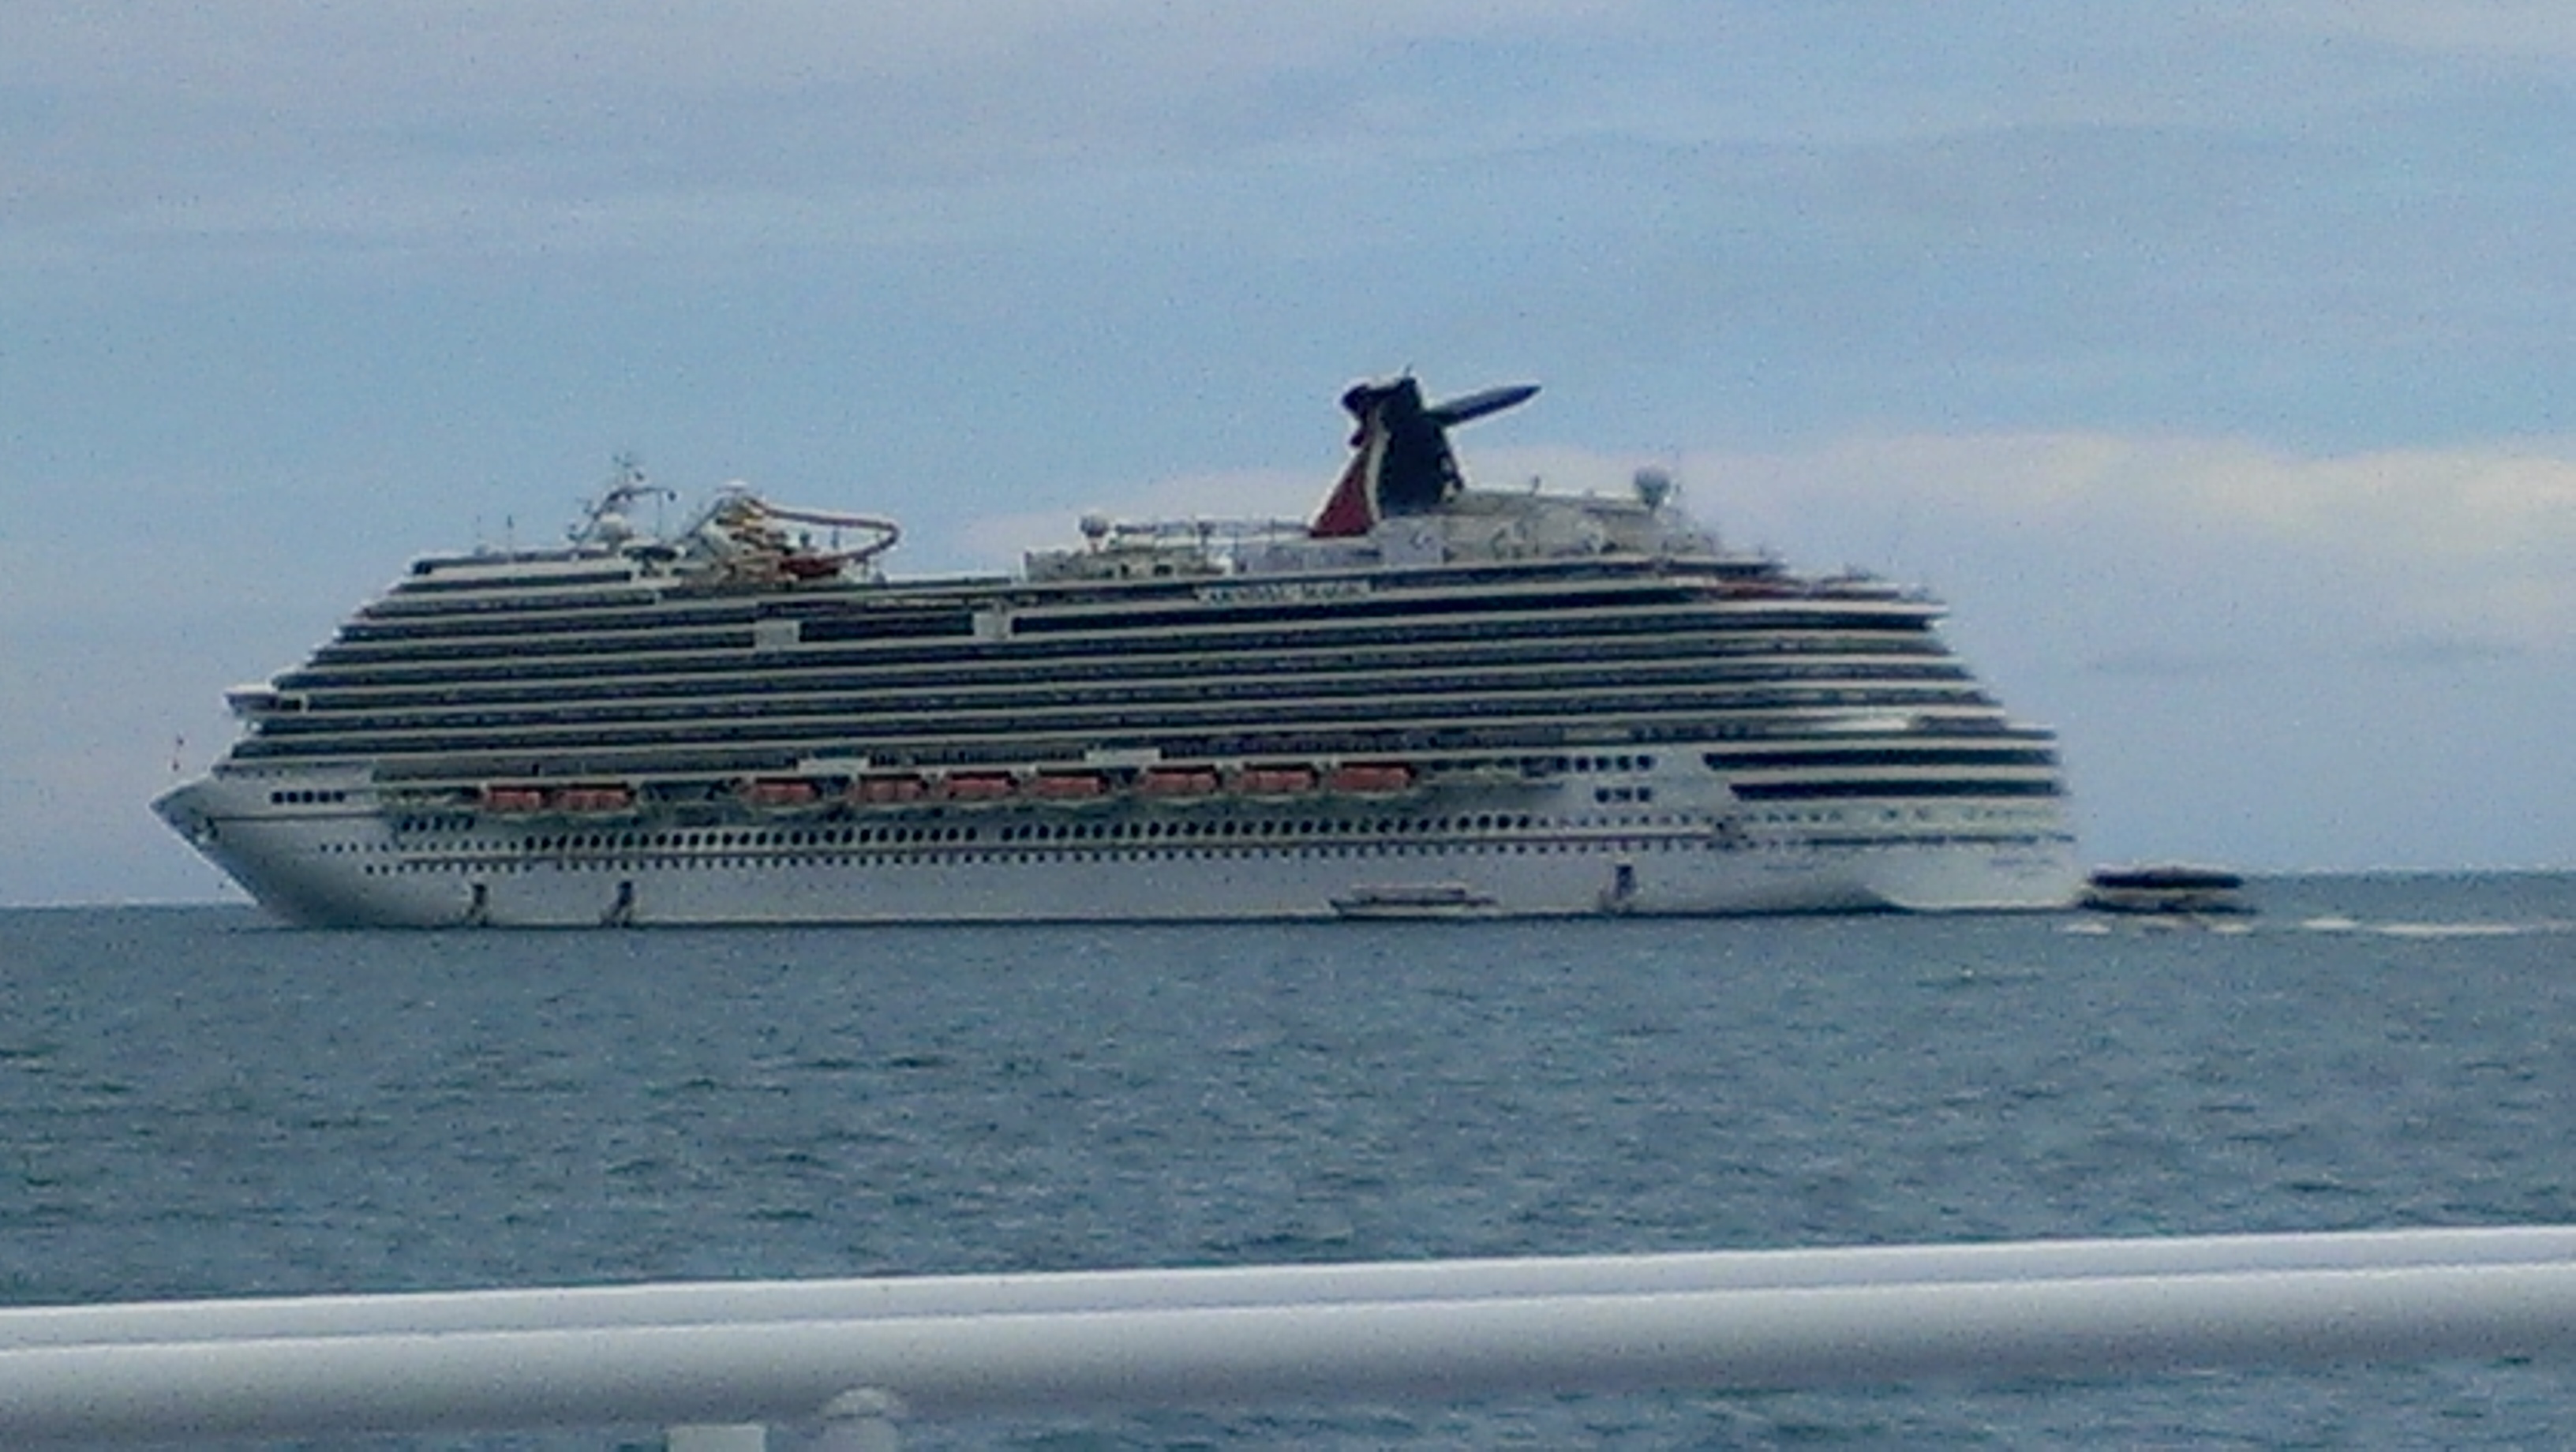 carnival cruise ship to belize